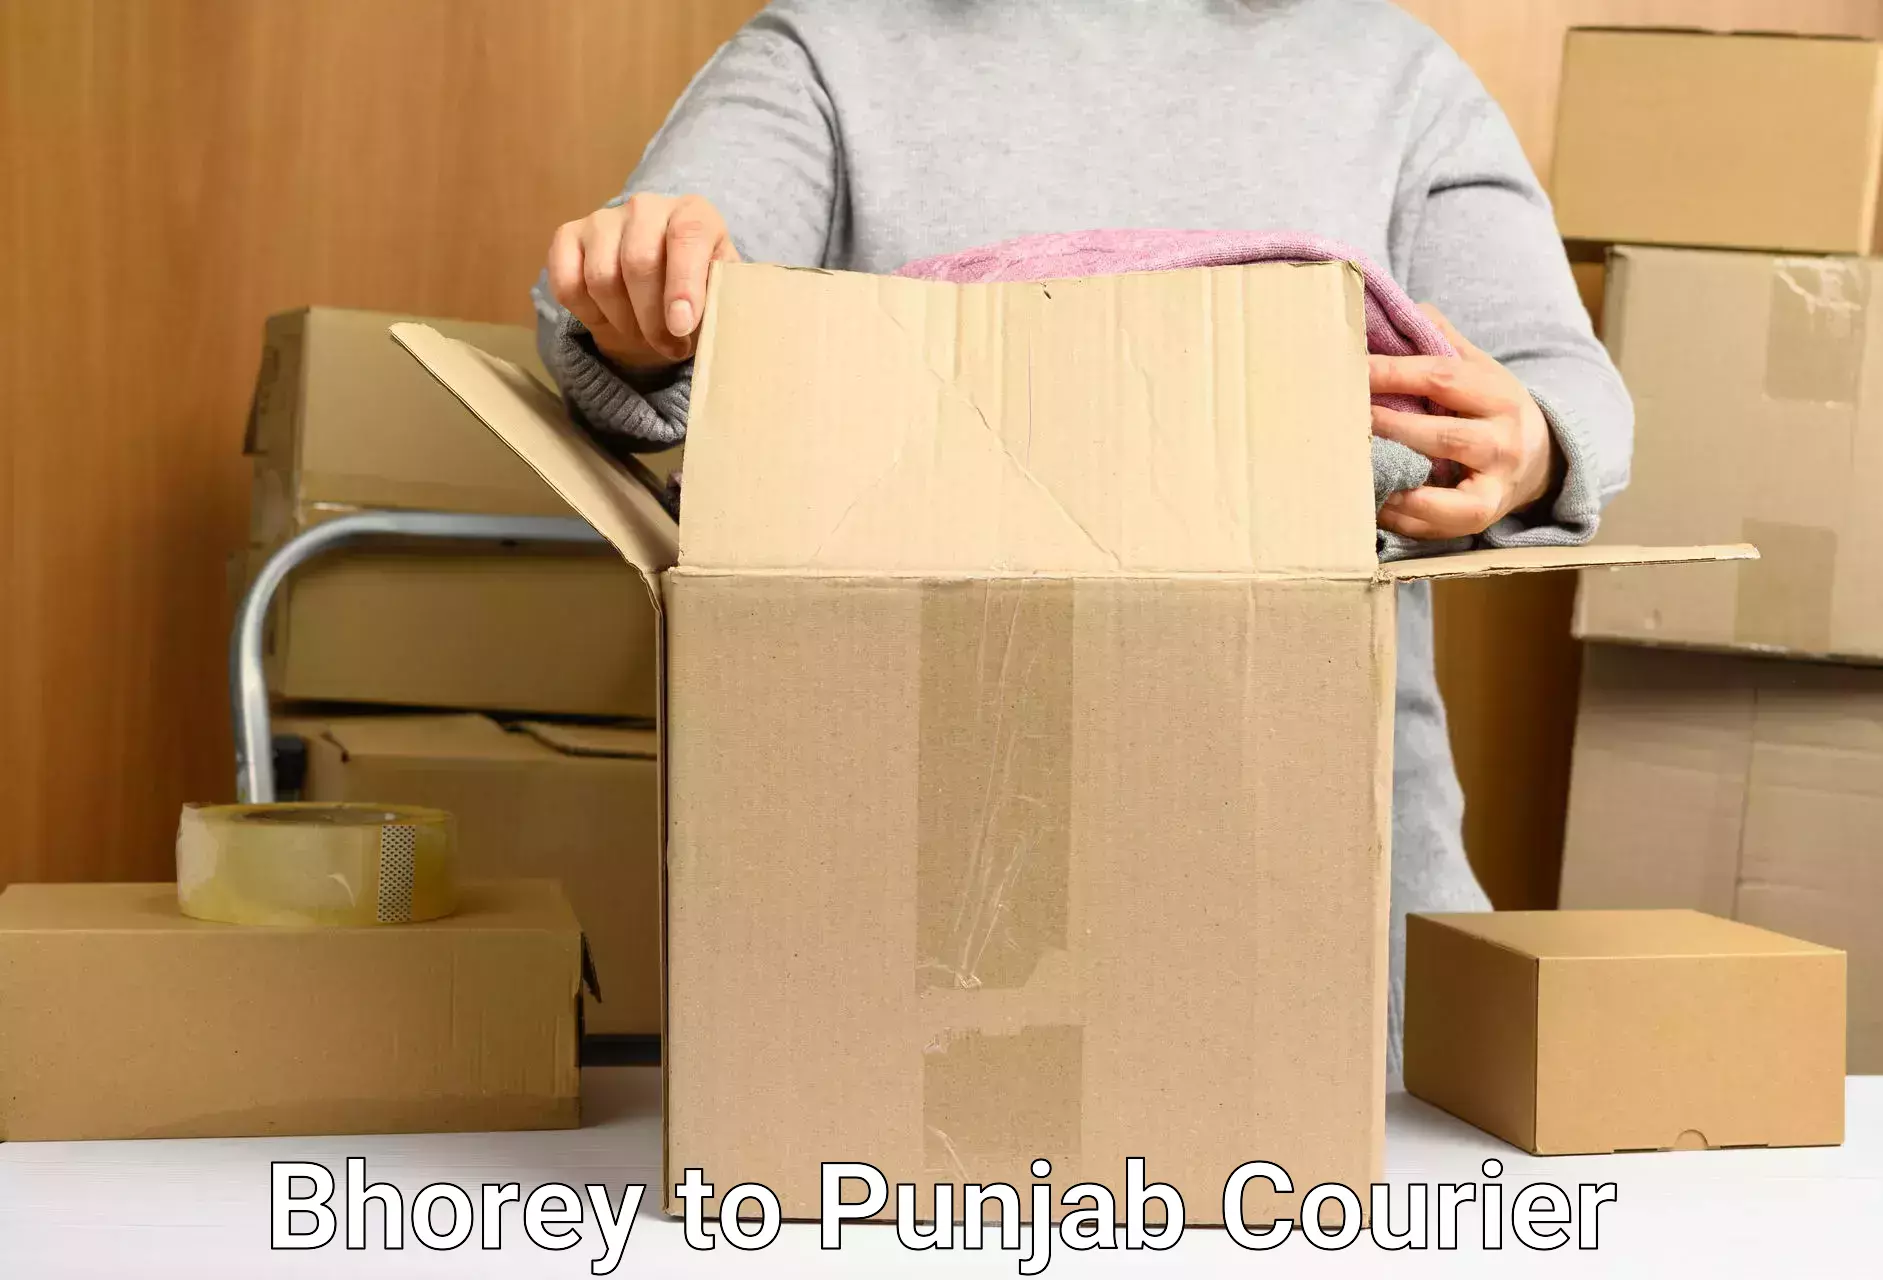 Package delivery network Bhorey to Patiala